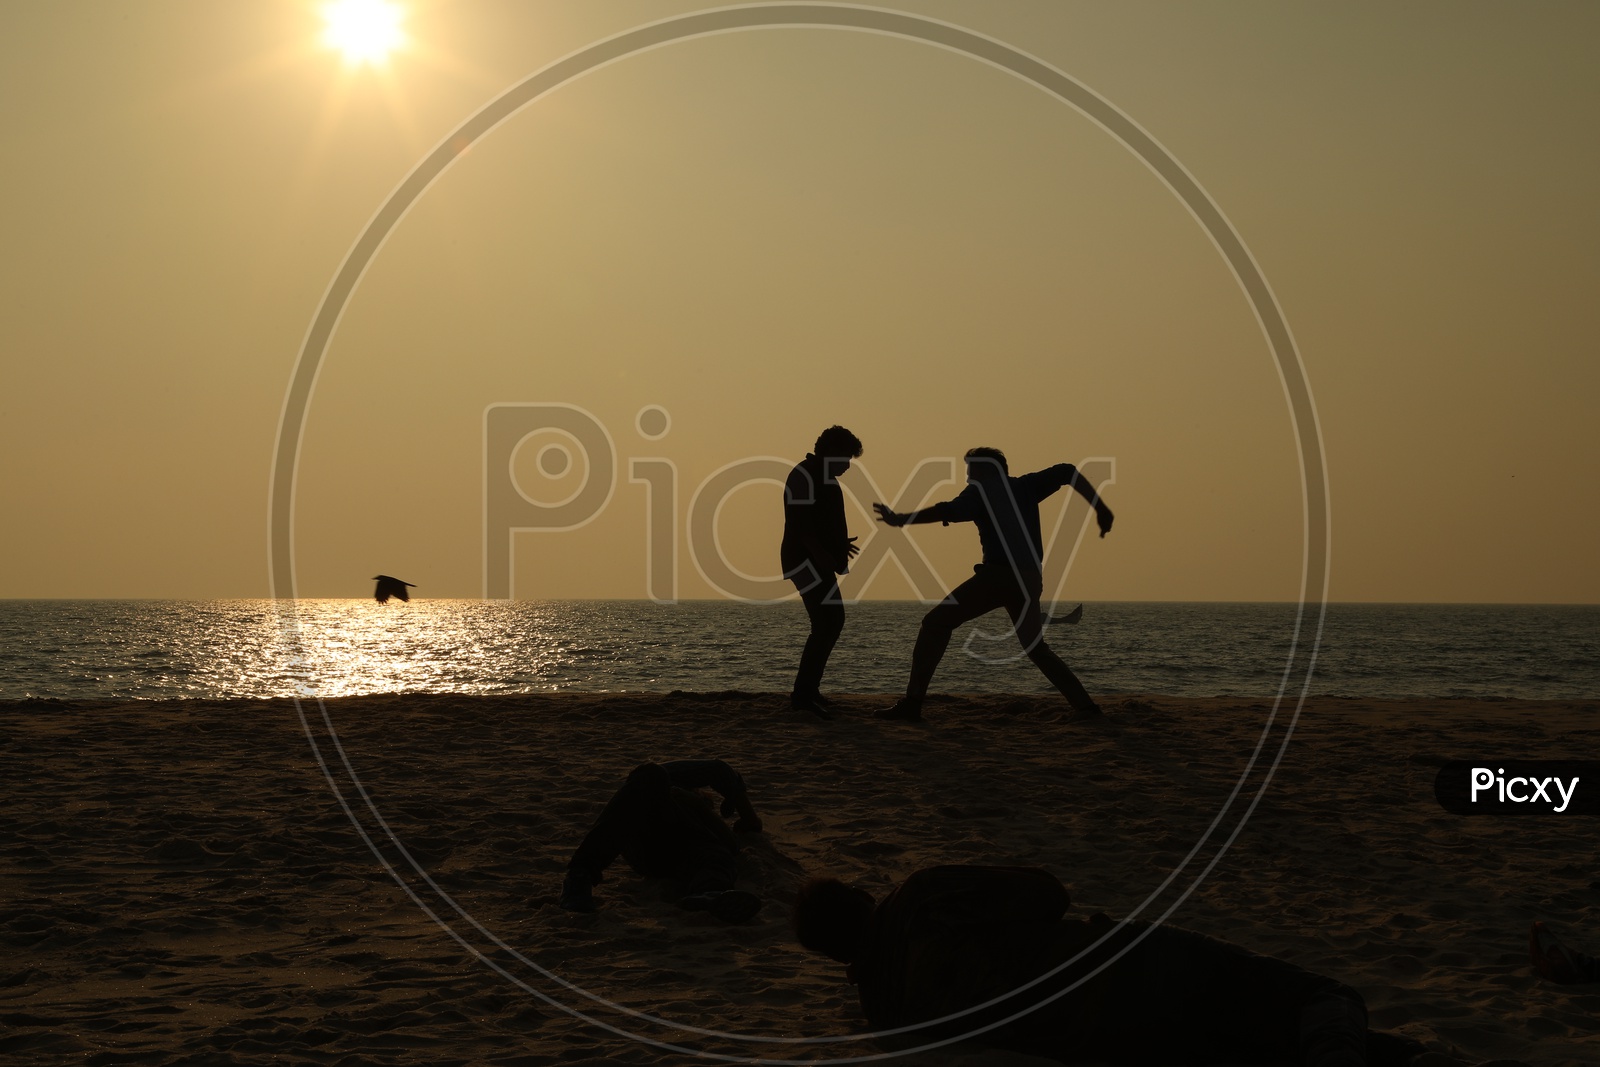 Silhouette of men fighting at a beach